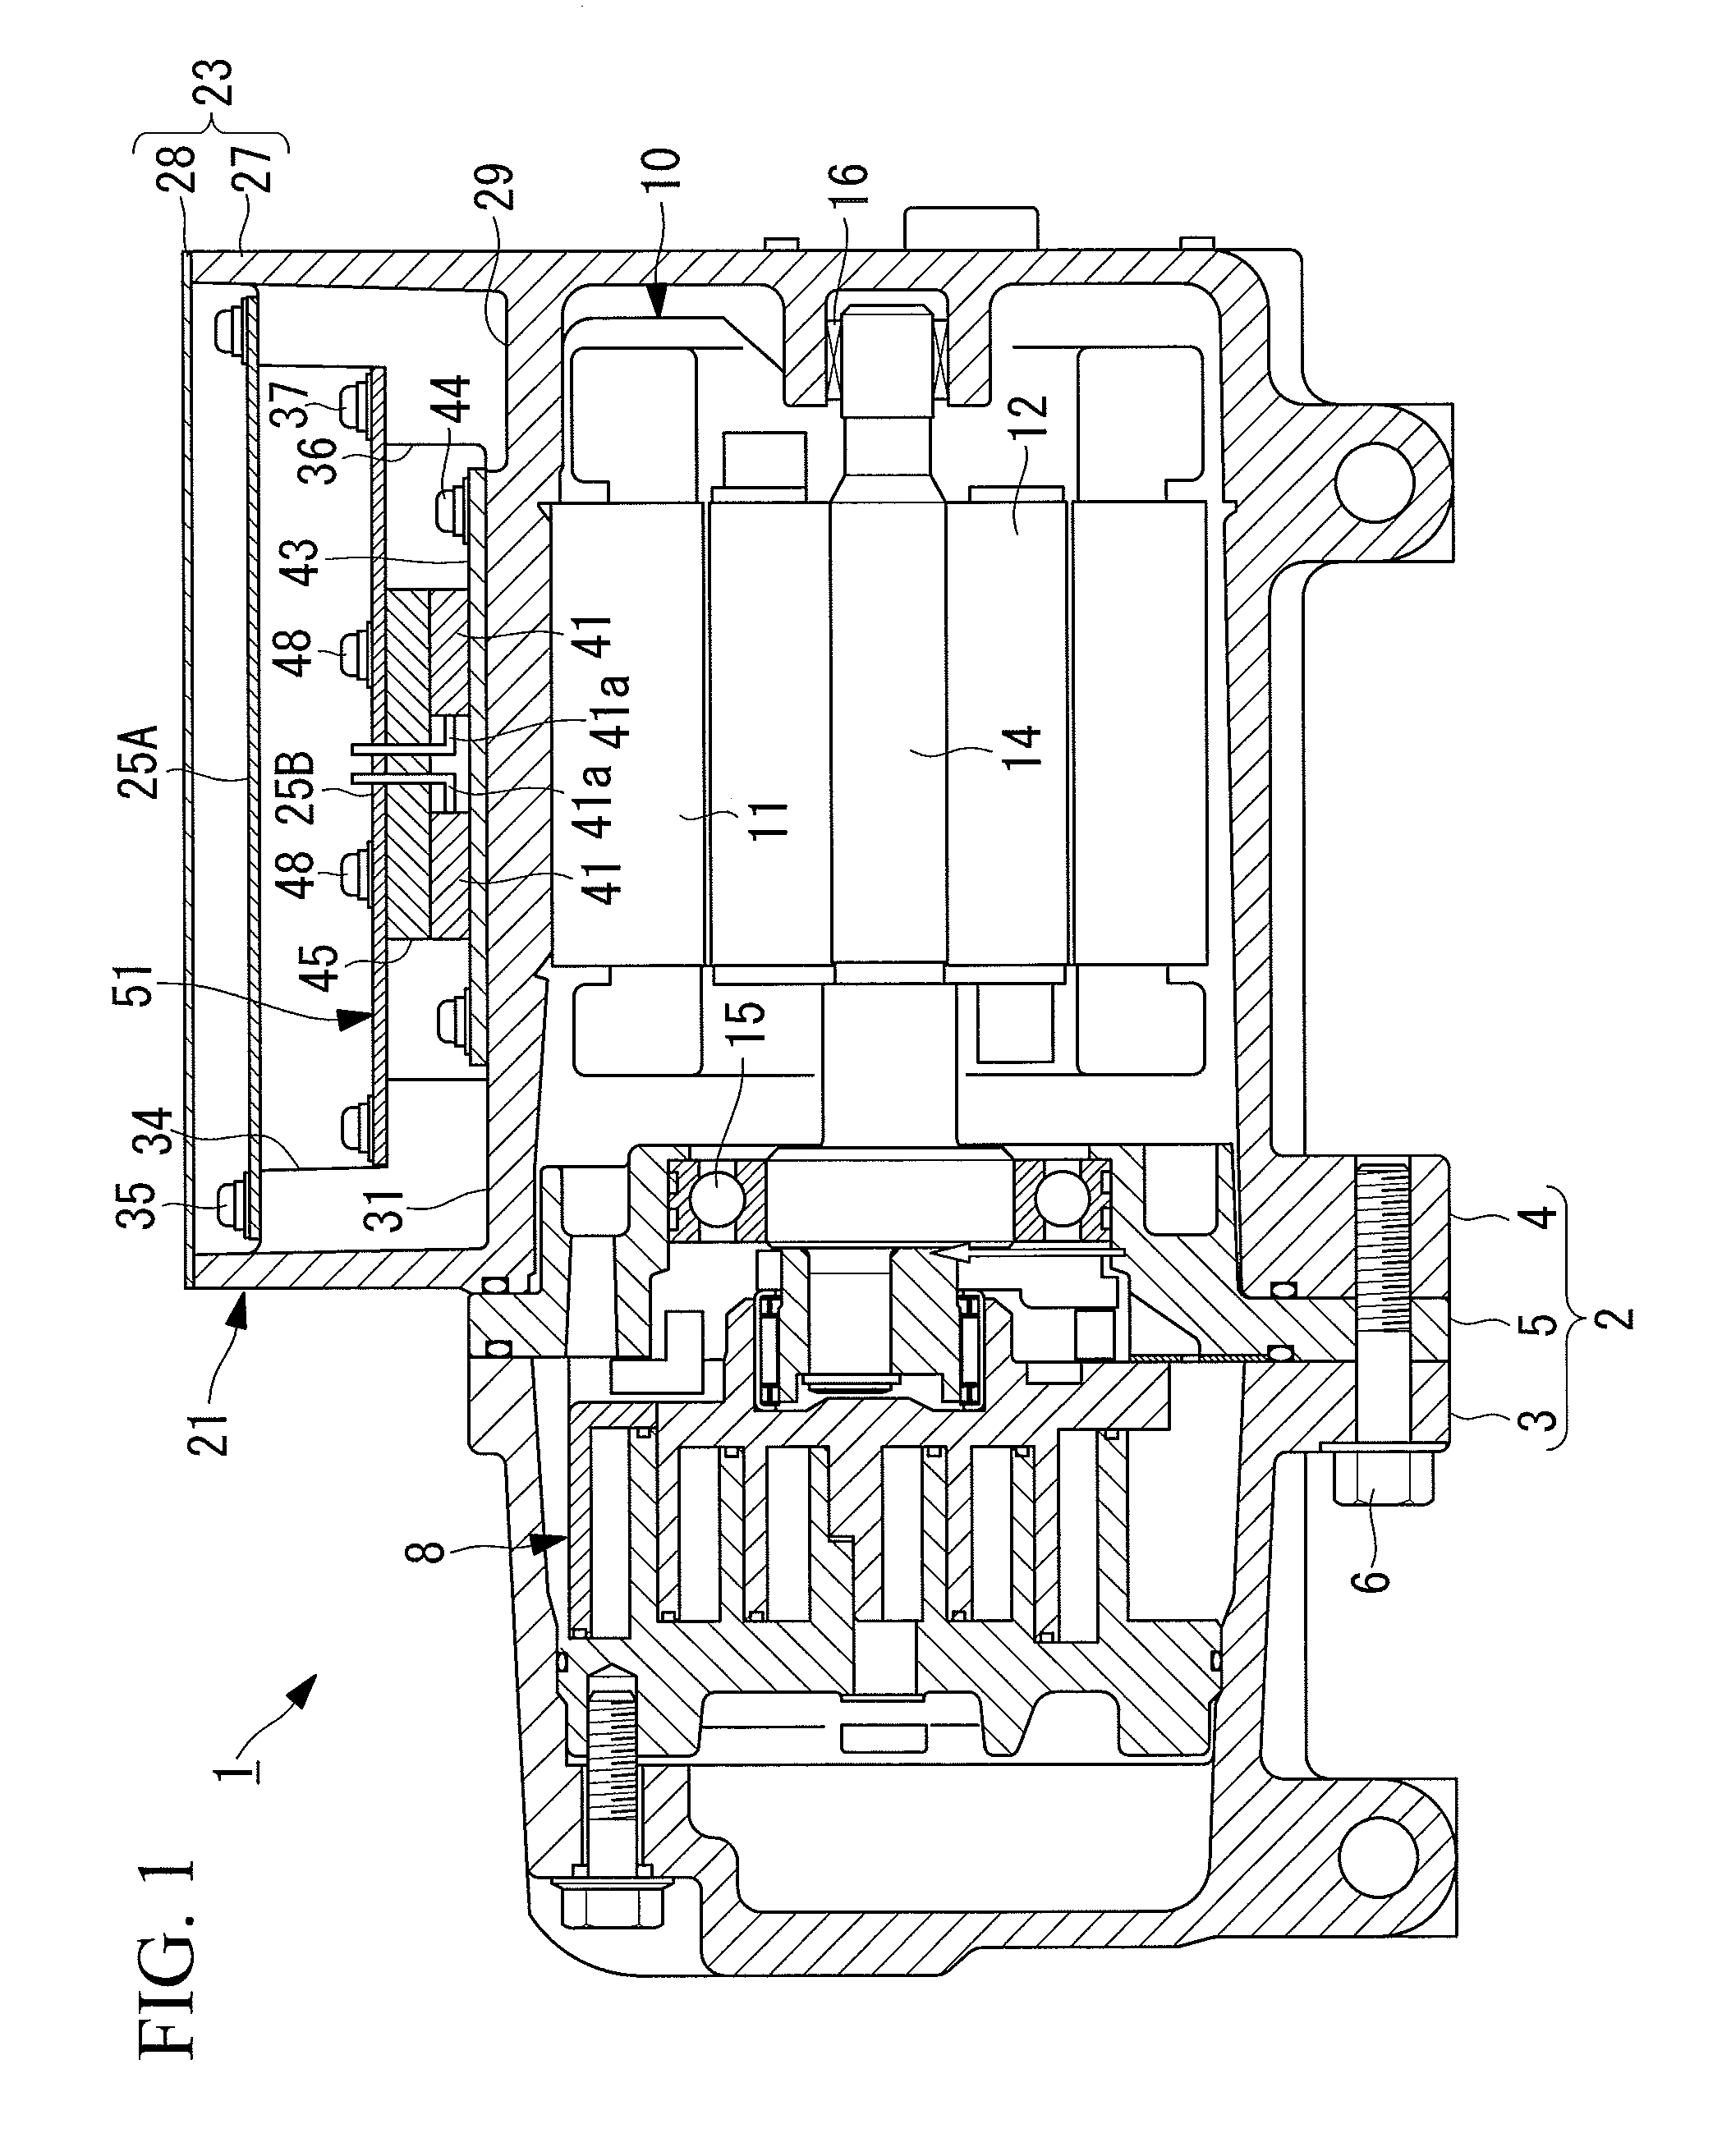 Inverter-integrated electric compressor and assembly method therefor